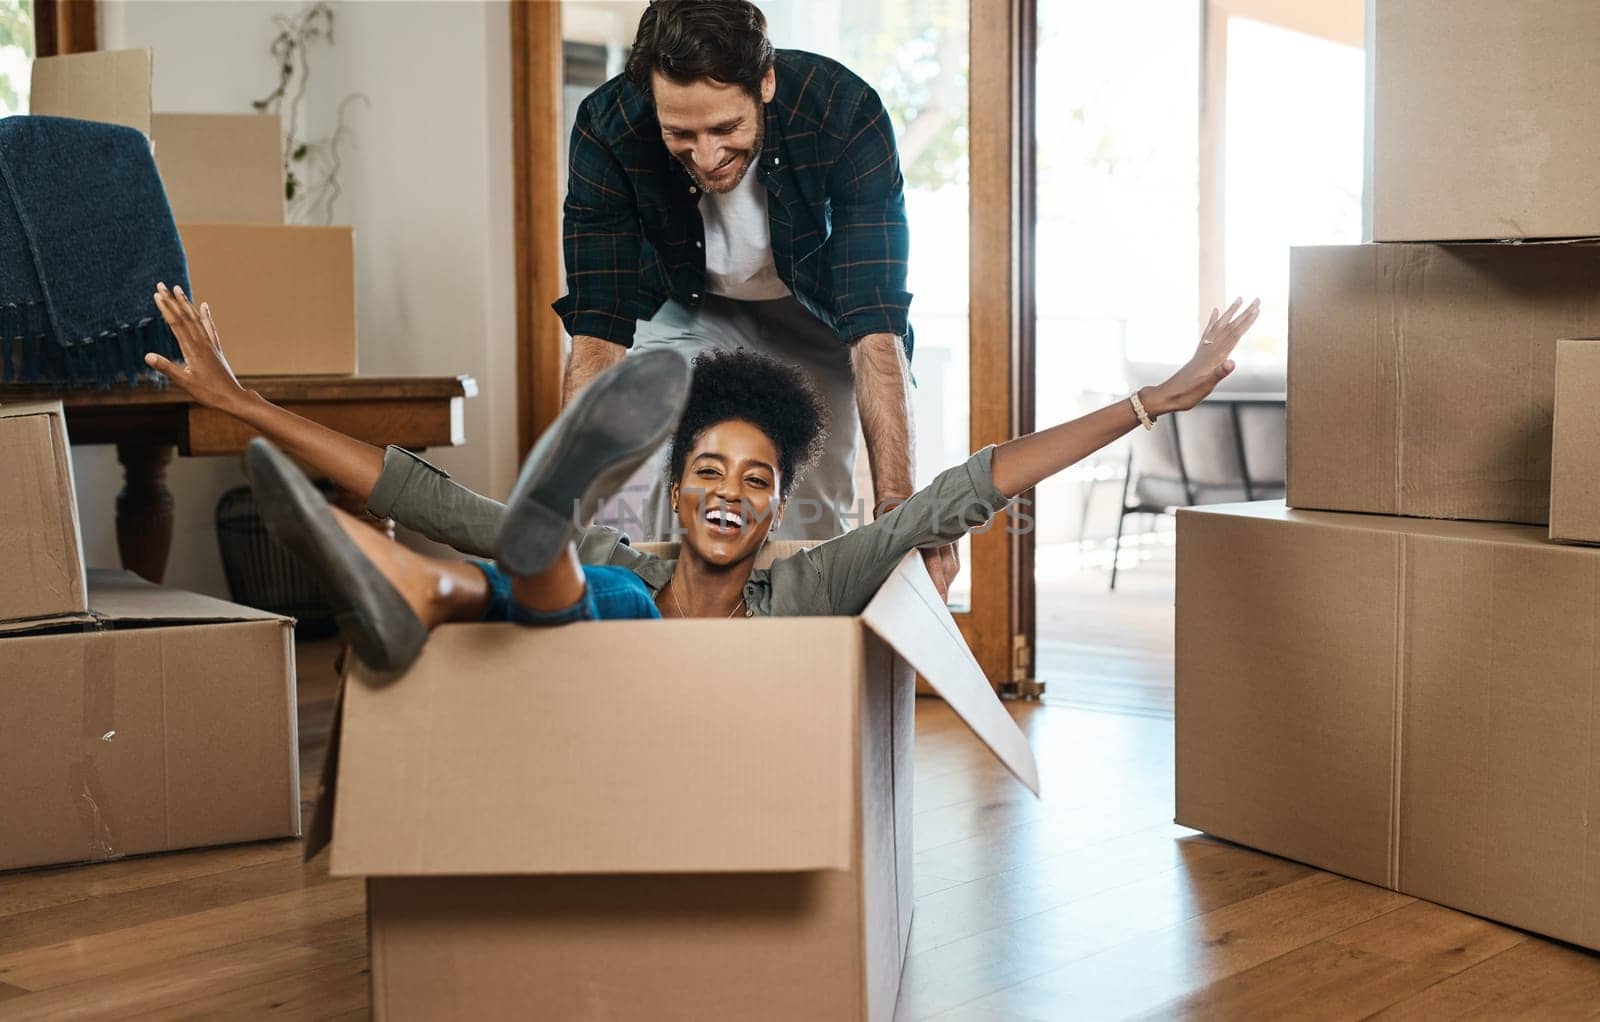 Happy couple, box and fun for moving to new home, real estate property and celebrate together. Excited man, woman and interracial partner playing in boxes at house for freedom, renovation or mortgage.